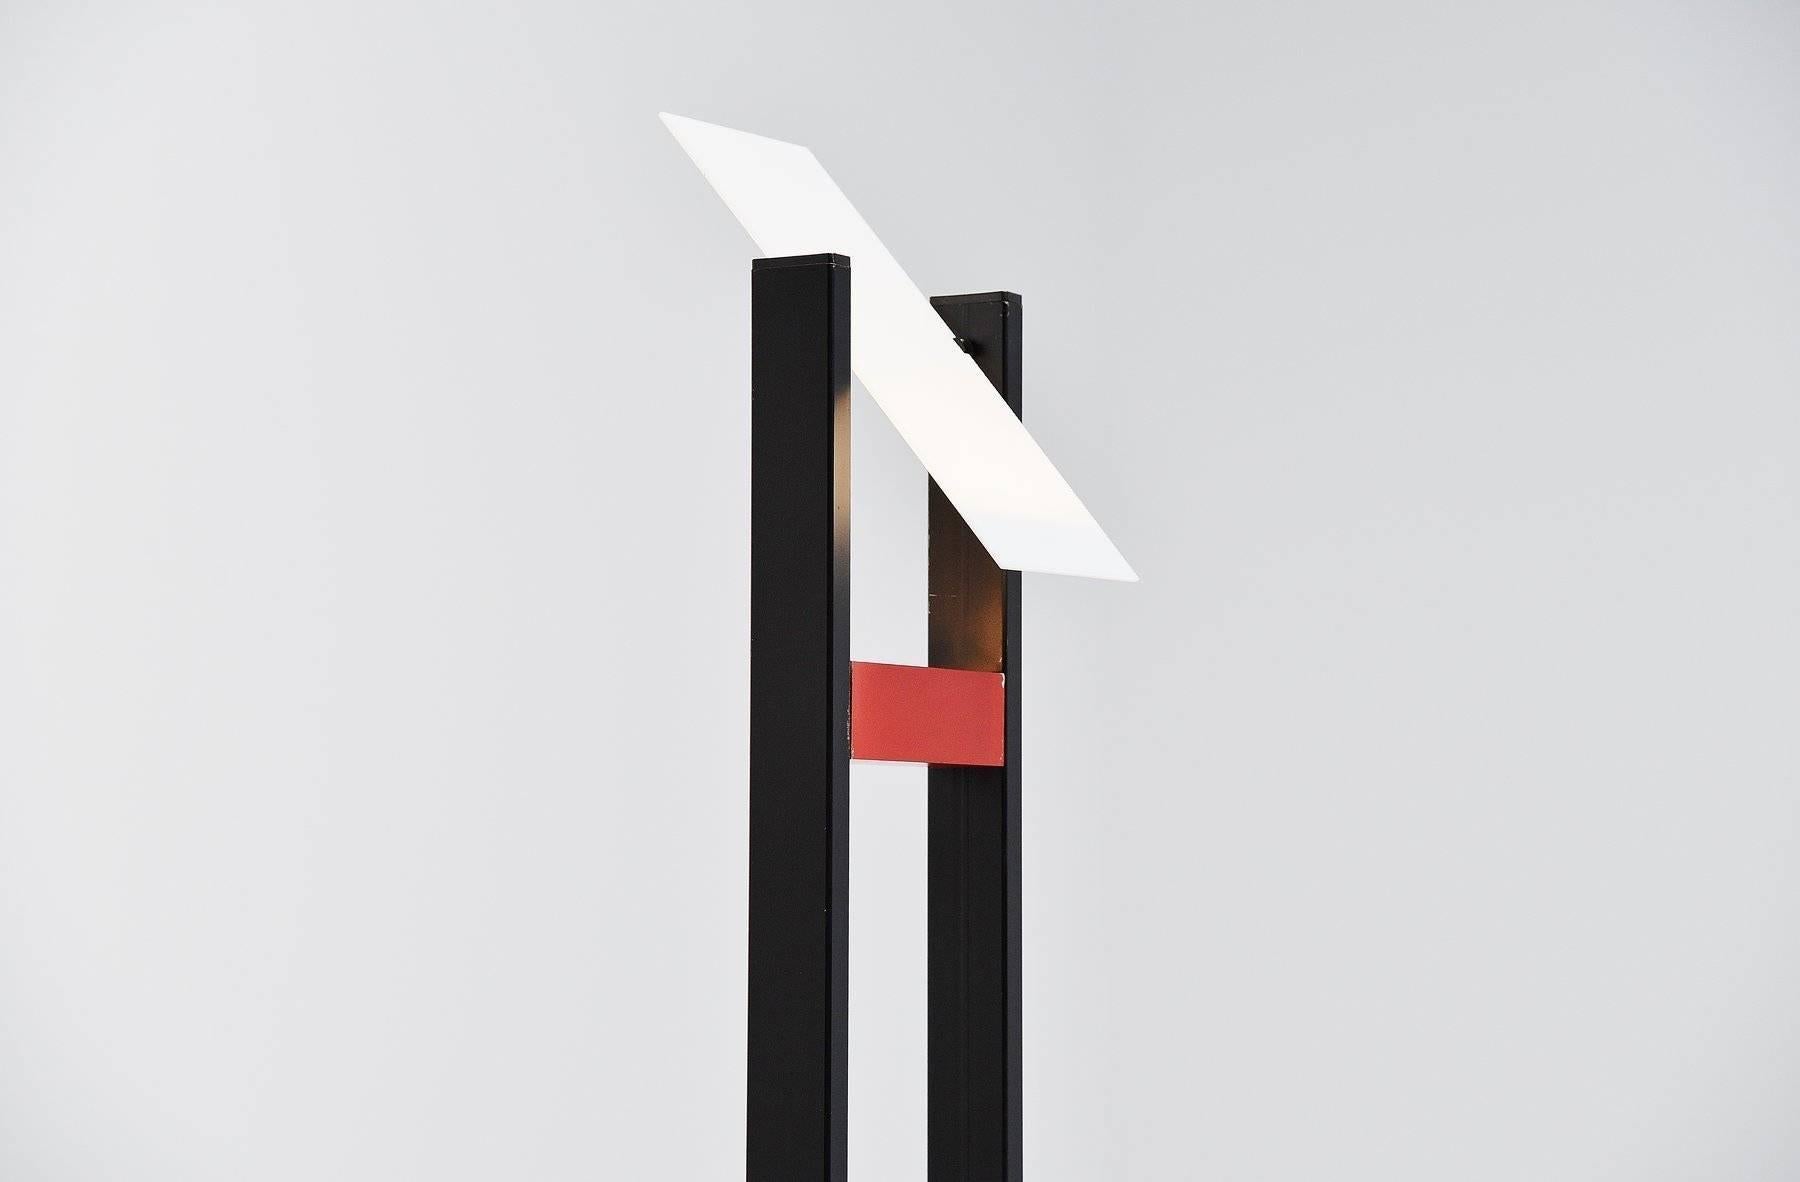 Very nice large uplighter made in the Memphis period where Ettore Sottsass and Alessandro Mendini founded the style. This lamp has a marble base and black lacquered arms, a nice red detail and plexi diffuser so you can adjust the light beam. The